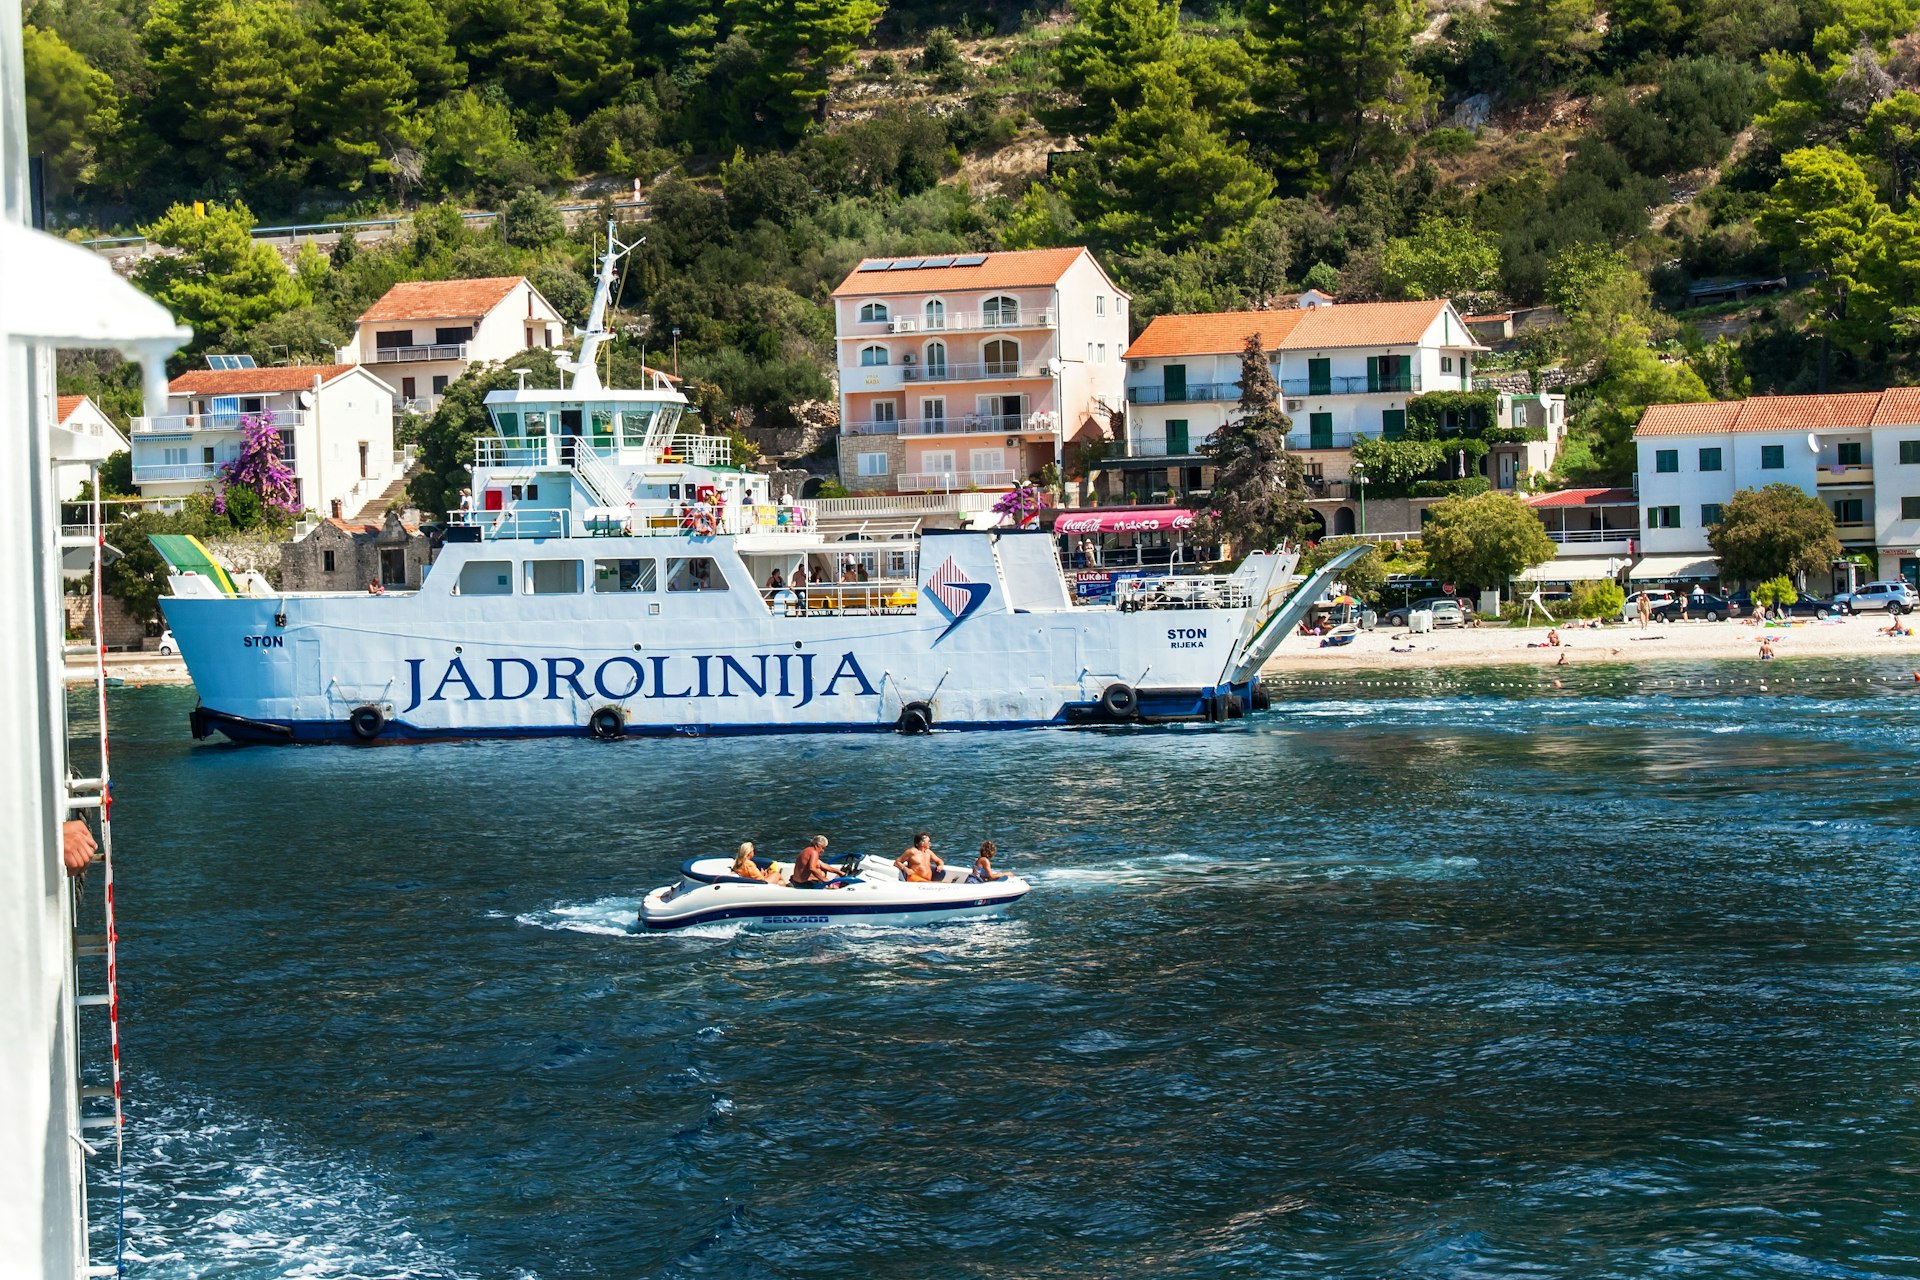 A group of kayakers pass in front of a large white car ferry with the words Jadrolinija printed on it